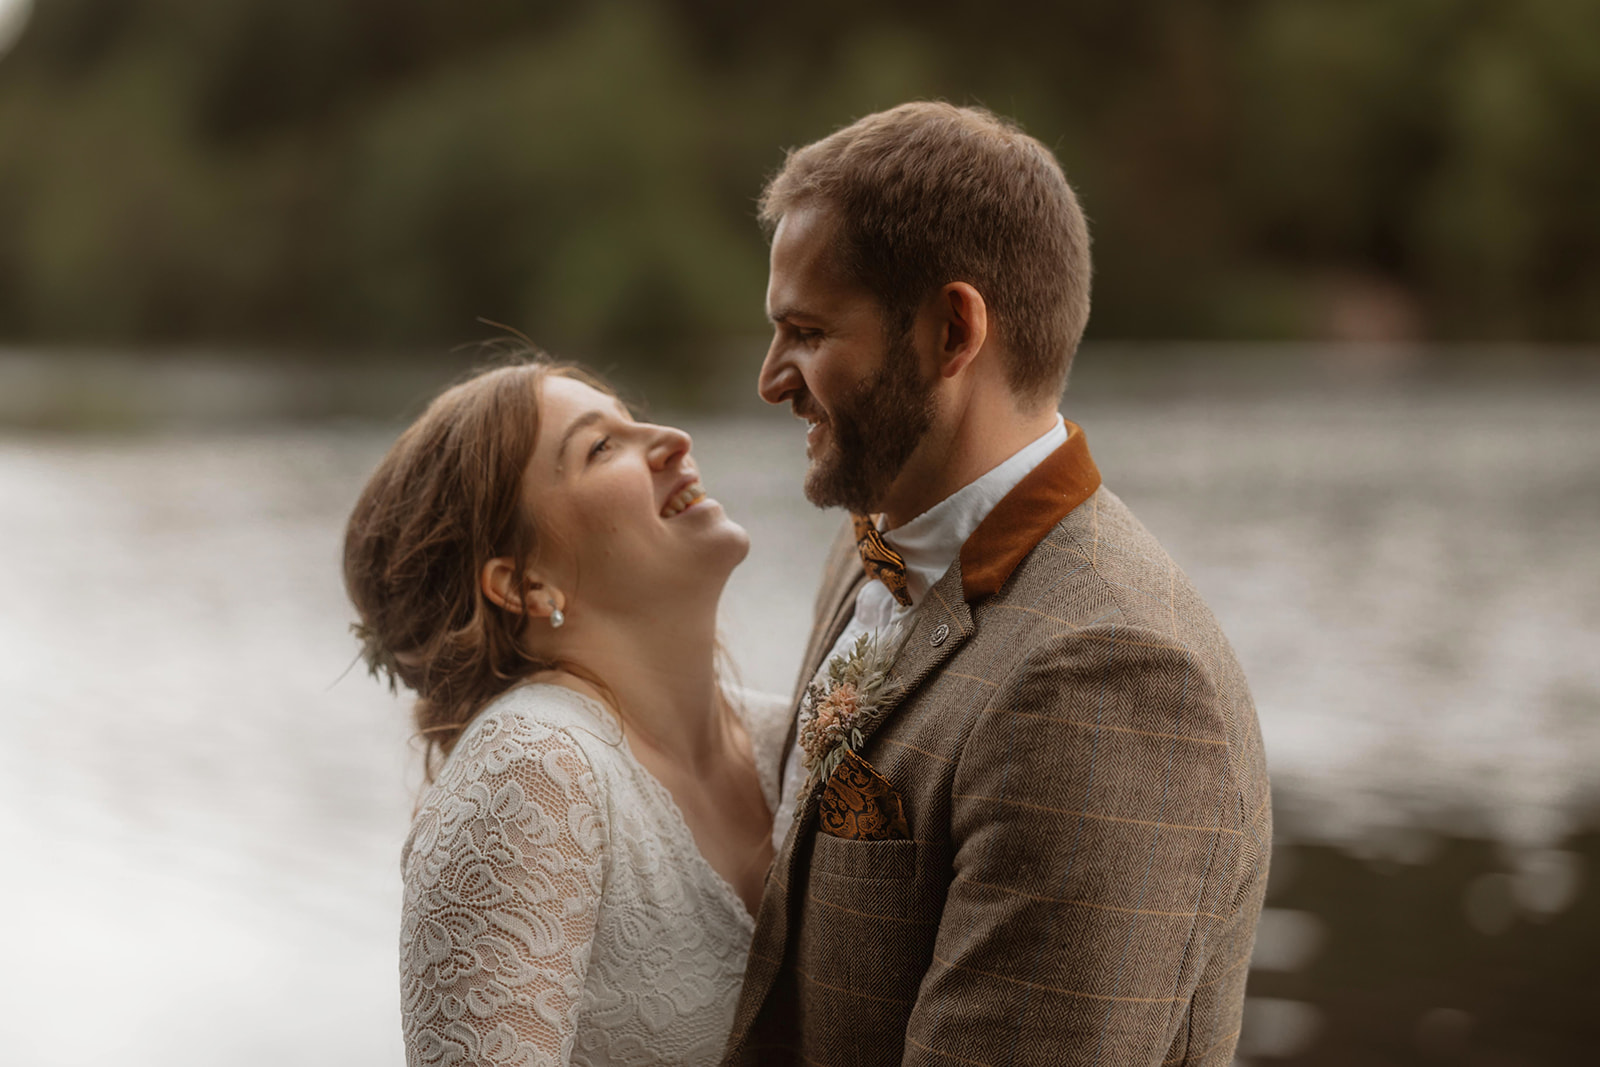 Holly and James enjoyed the views from the Jetty of Glencoe, Isle of Skye after their Elopement ceremony